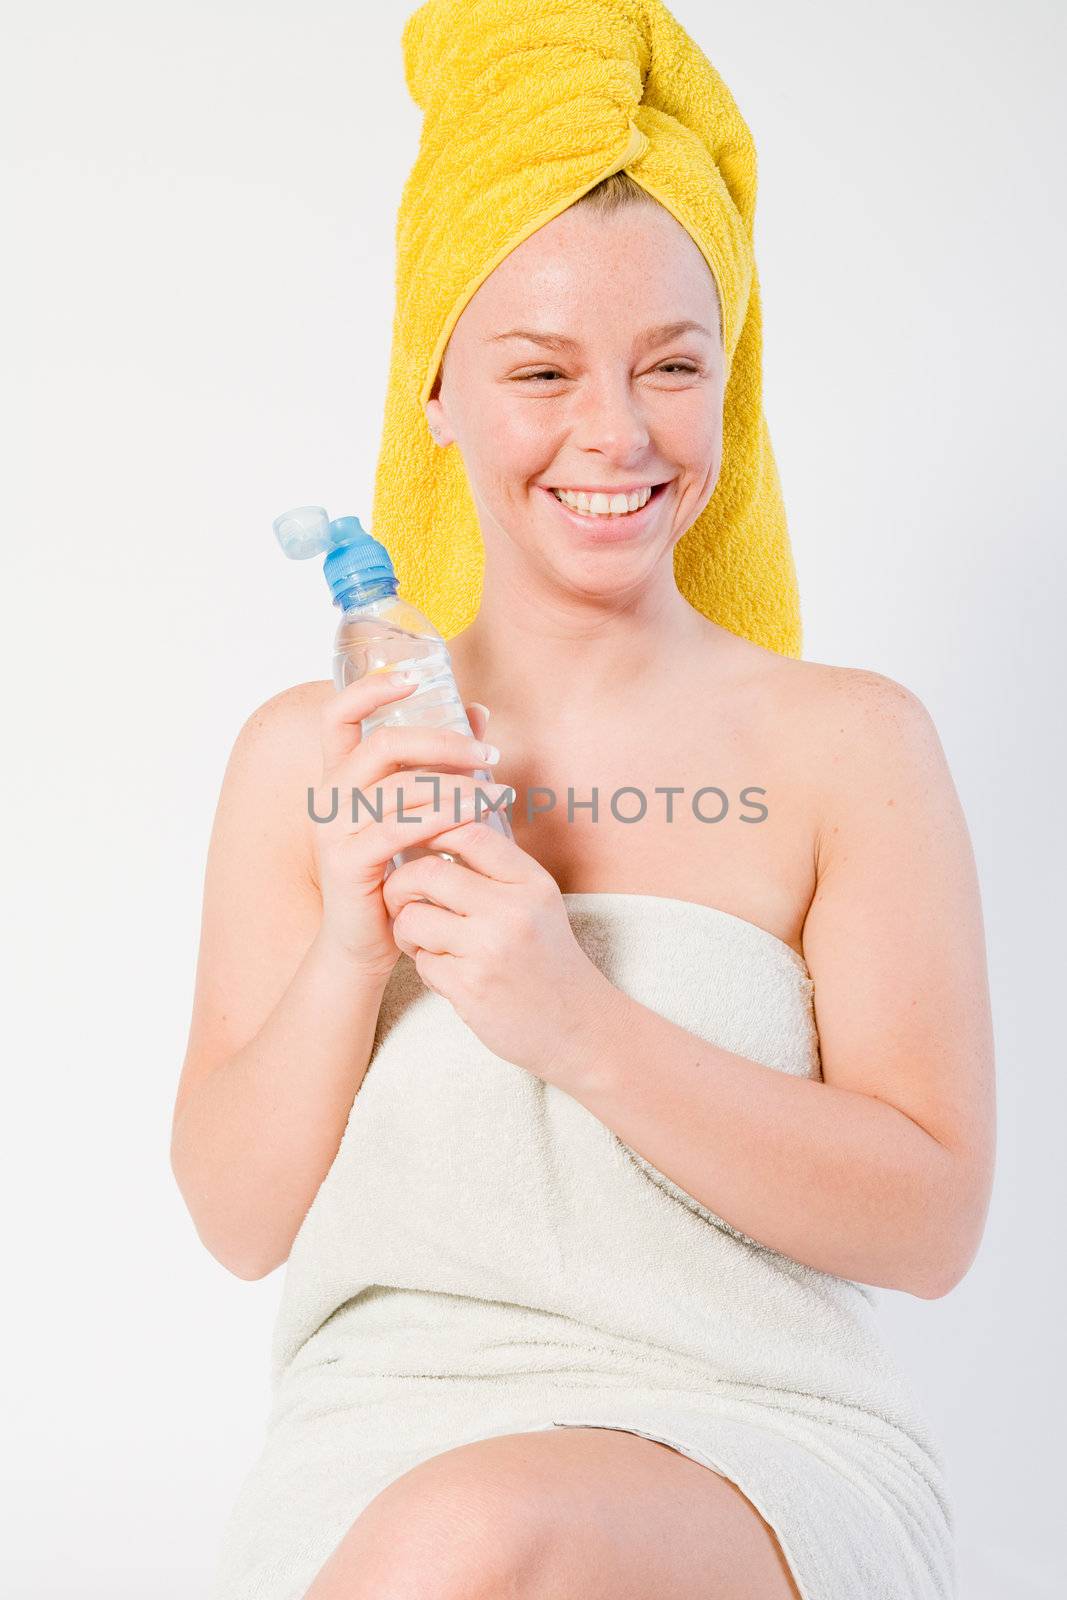 Studio portrait of a spa girl smiling with a bottle